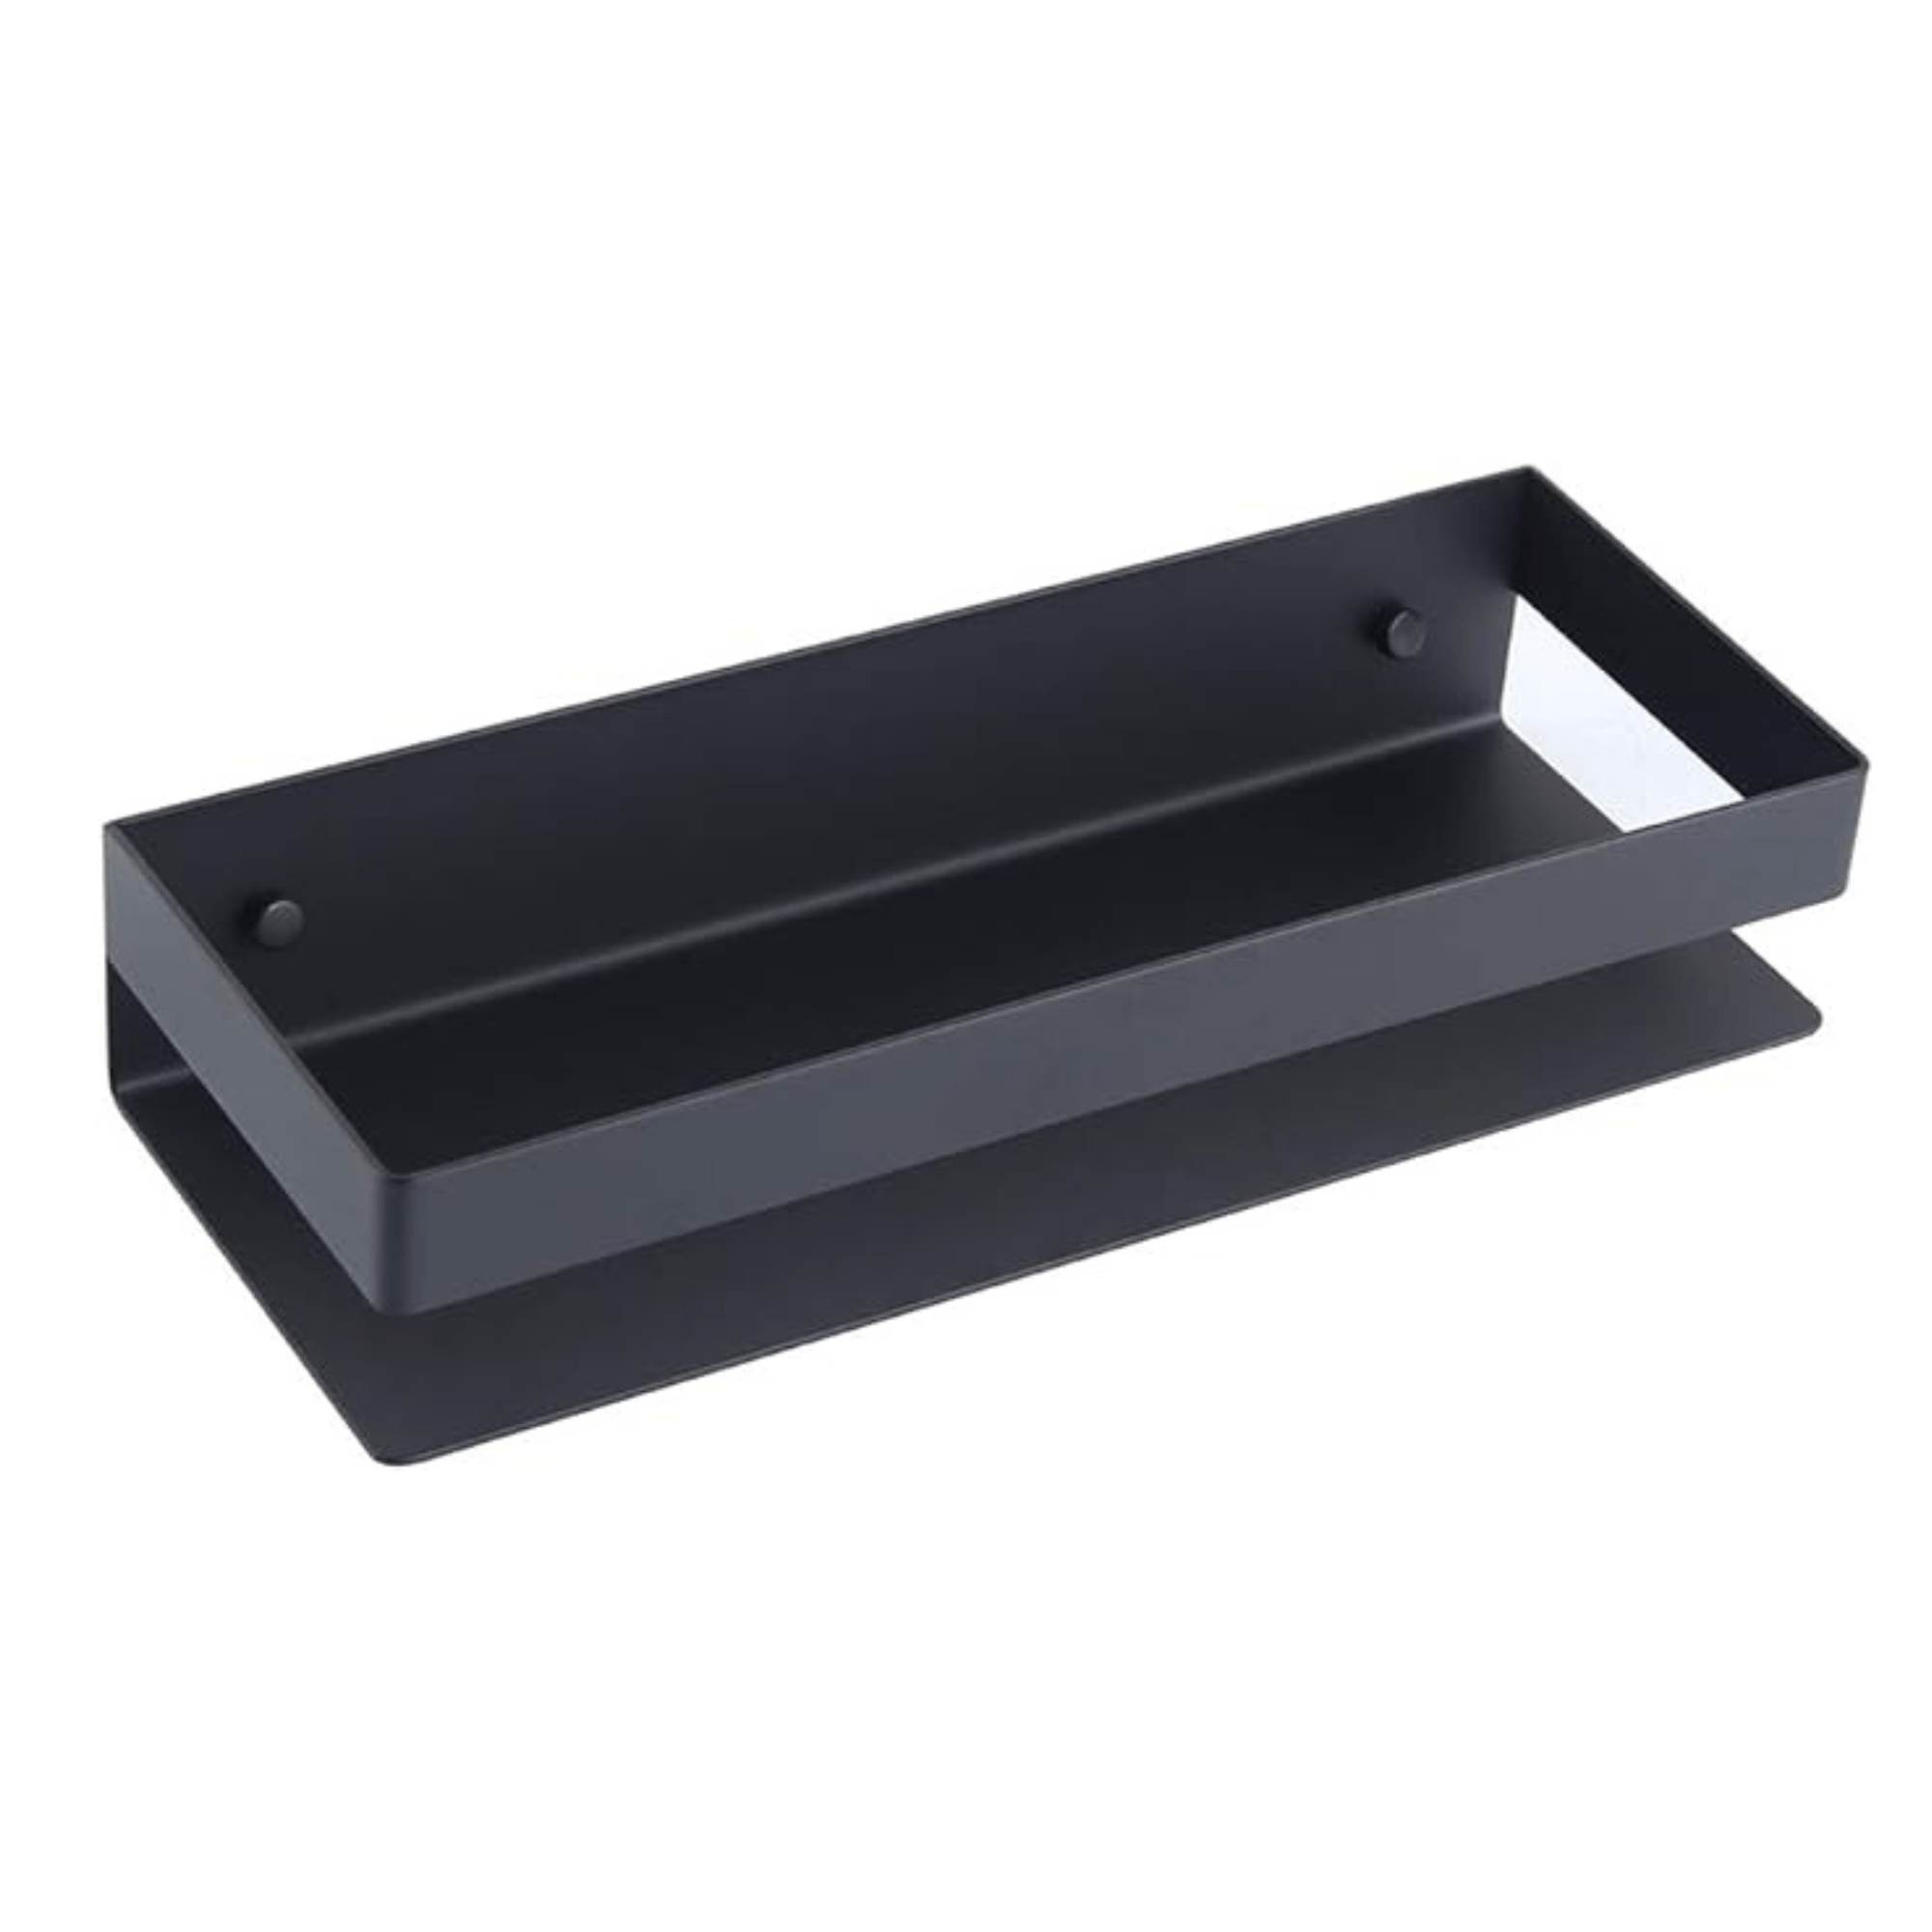 Shop Bathroom Stainless Steel Matte Black Towel Shelf with Single Towel Bar - 9623B | Buy Online at Supply Master Accra, Ghana Bathroom Accessories Buy Tools hardware Building materials